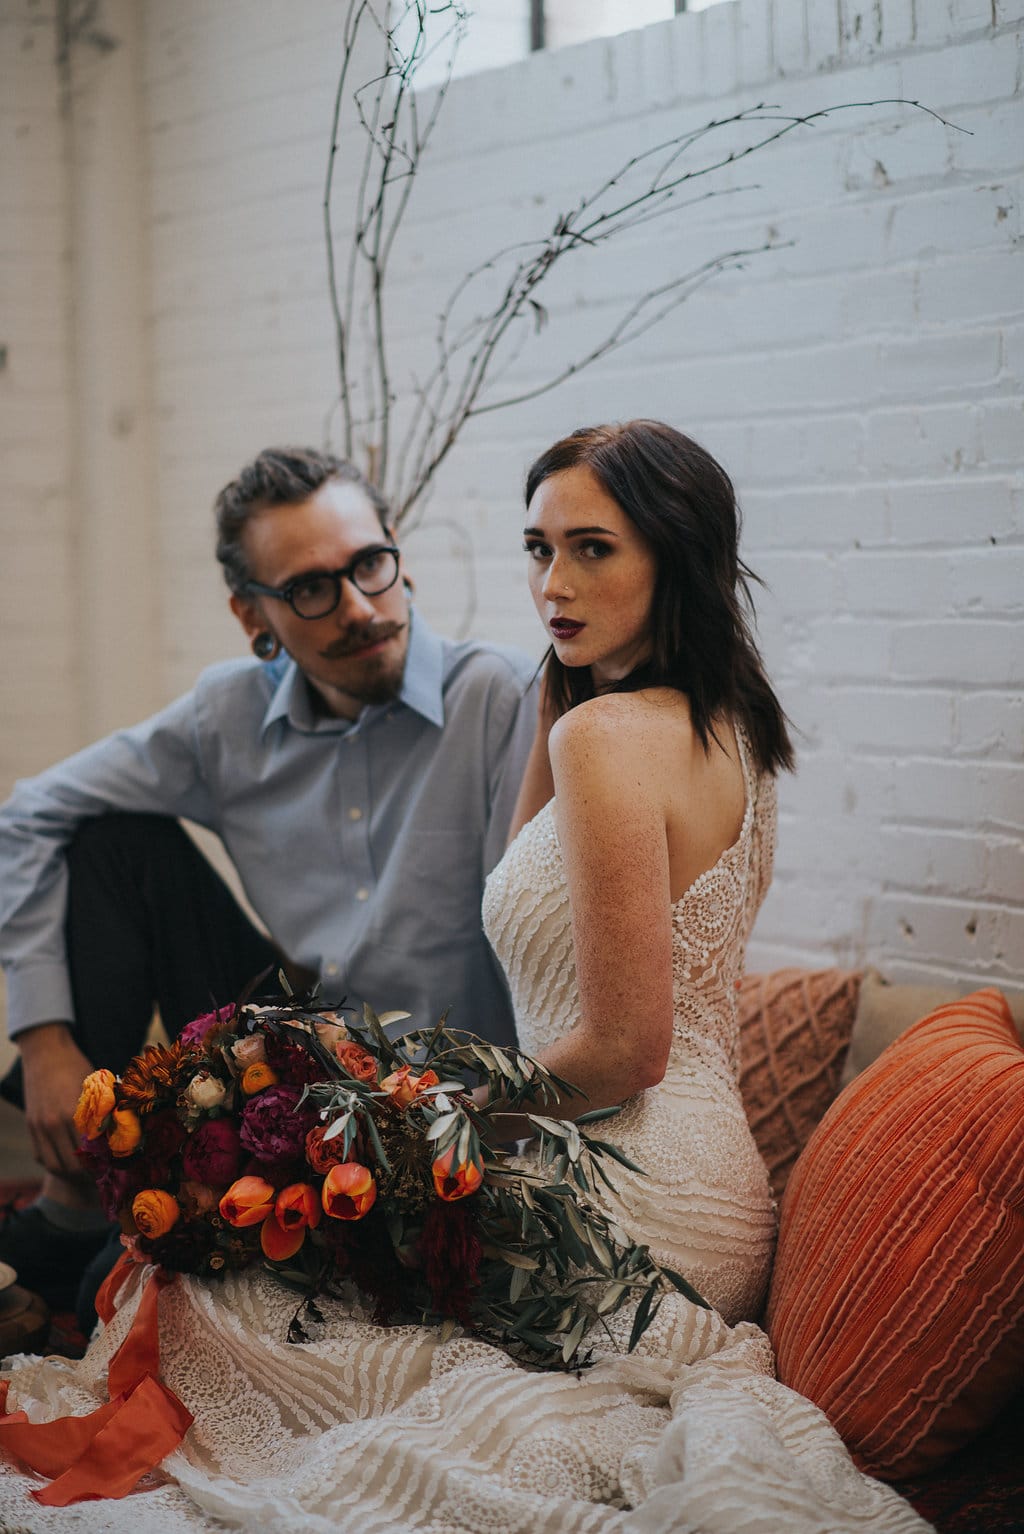 Lush Floral Palette with Unique Lace Wedding Dress - Styled Shoot featuring Bexley by Sottero and Midgley